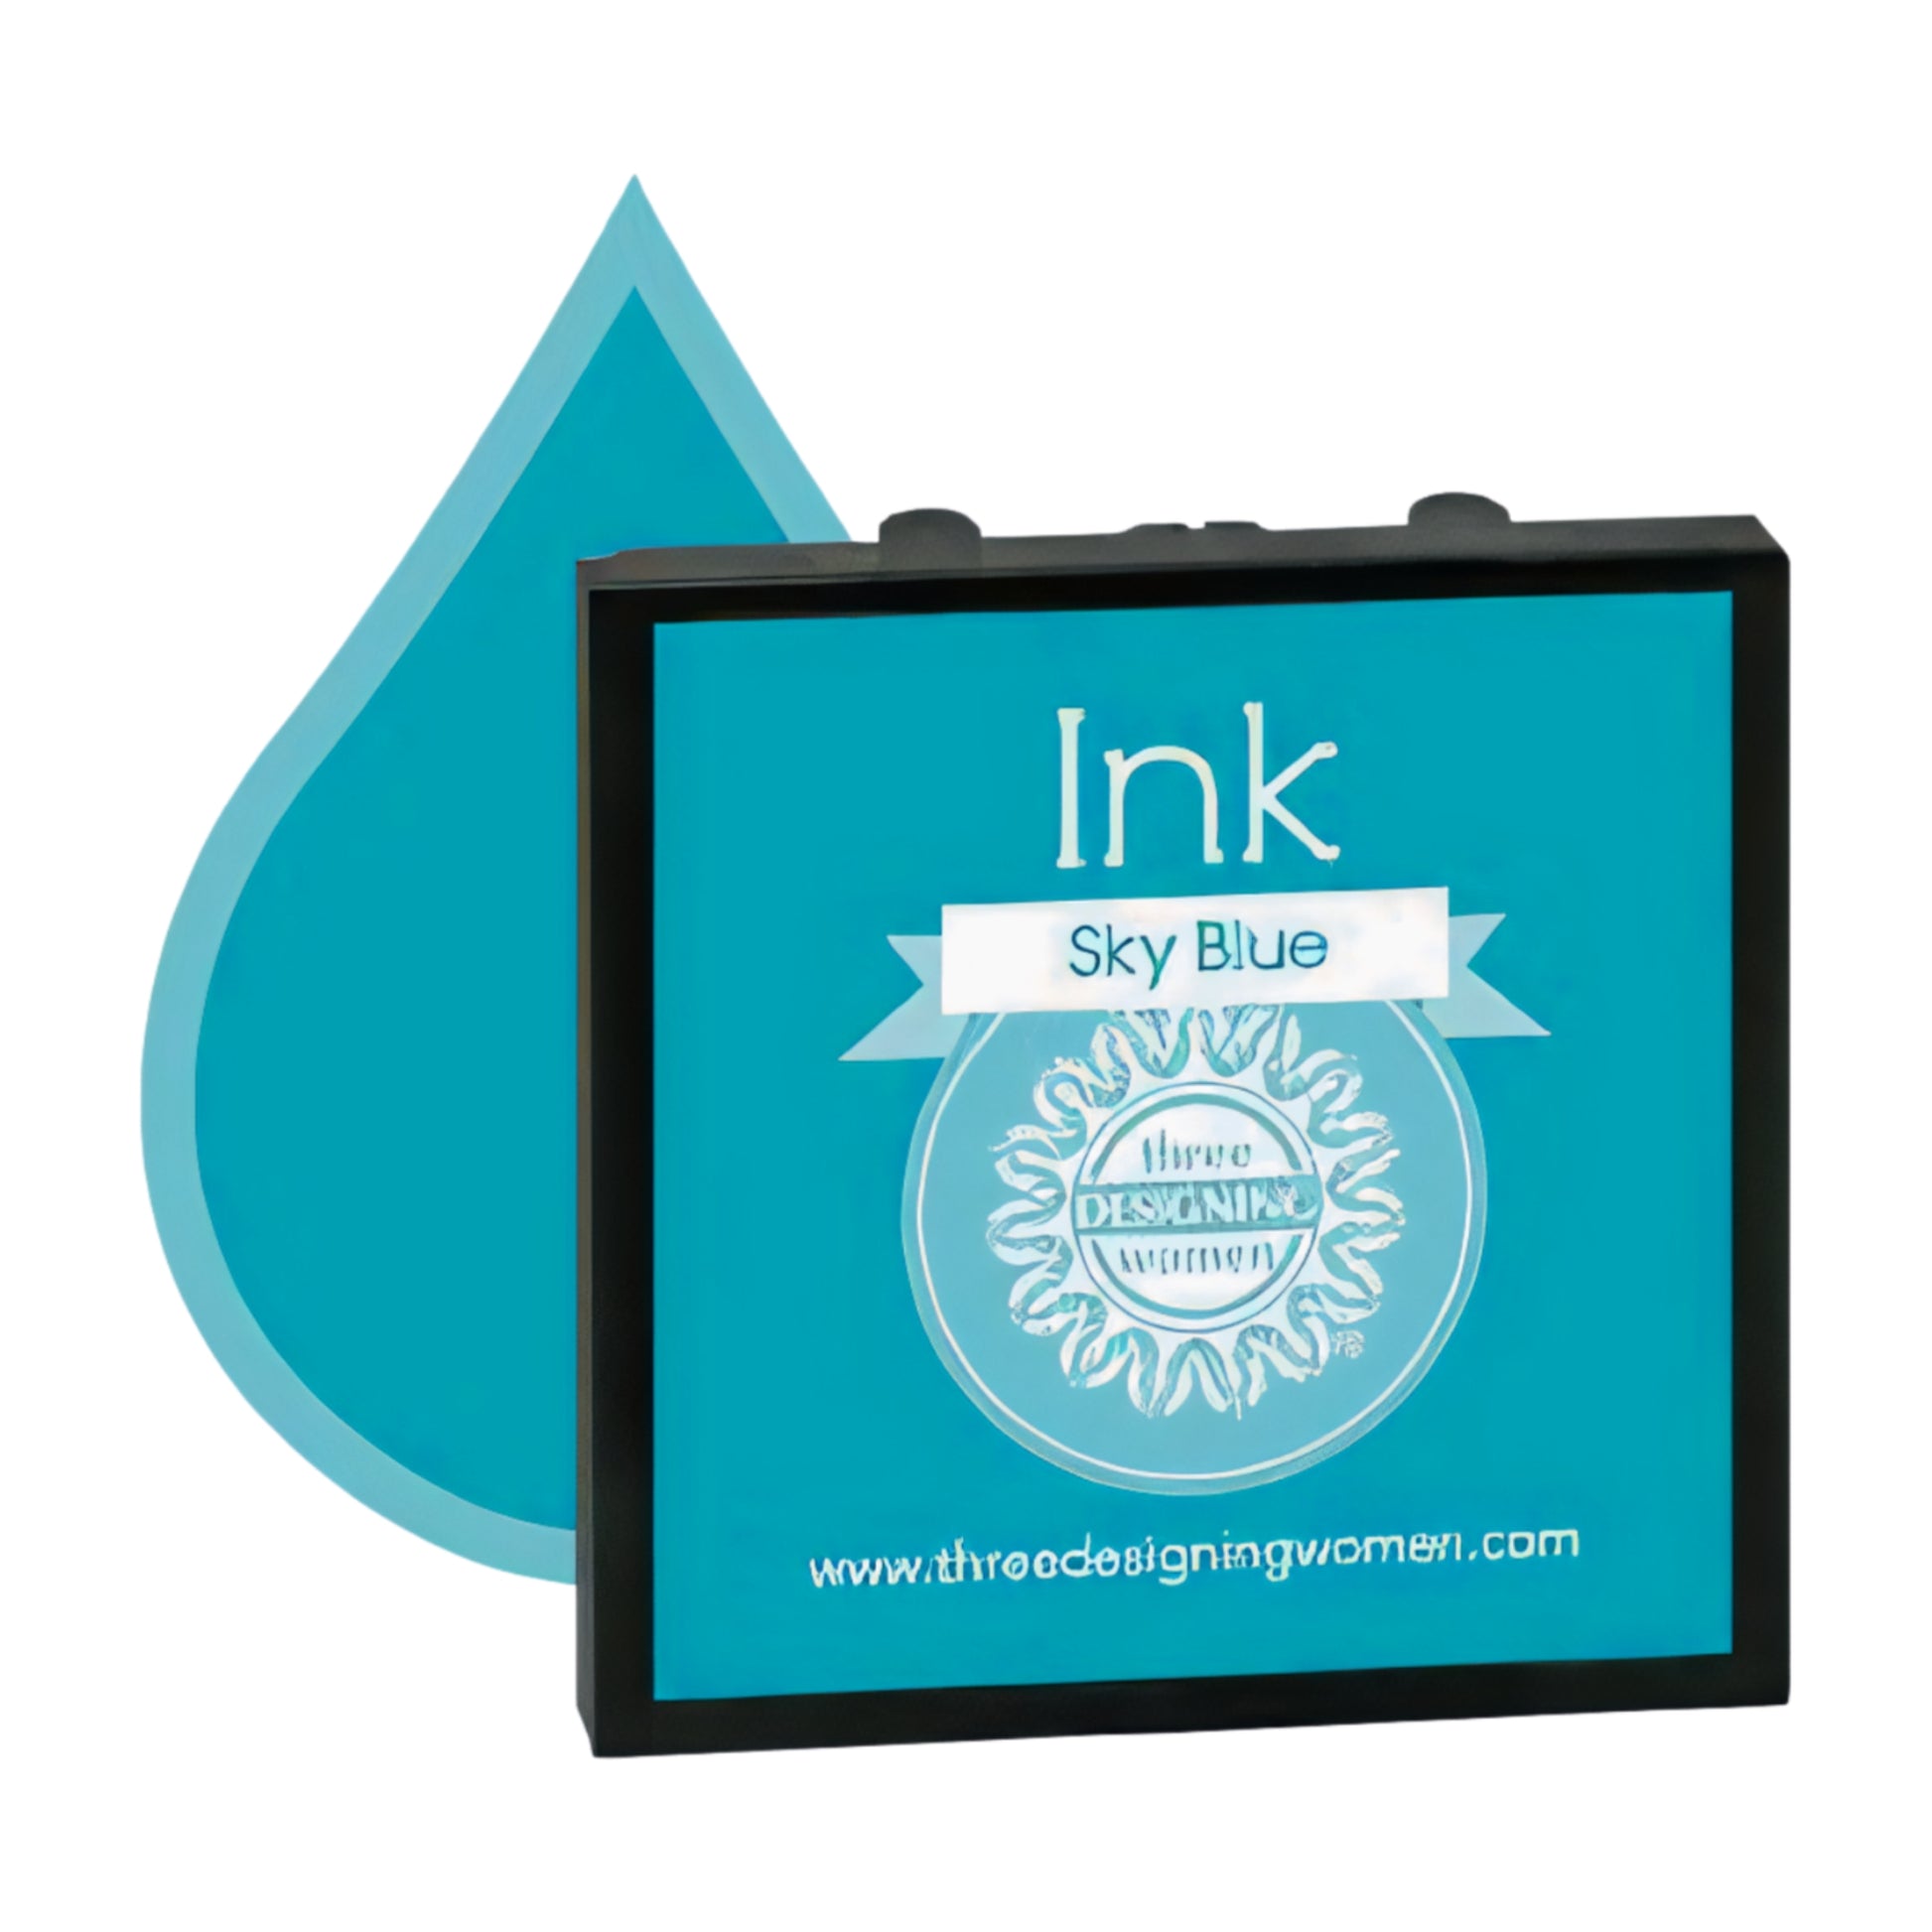 Ink Replacement Cartridge "Sky Blue" for Self-Inking Stampers Three Designing Women